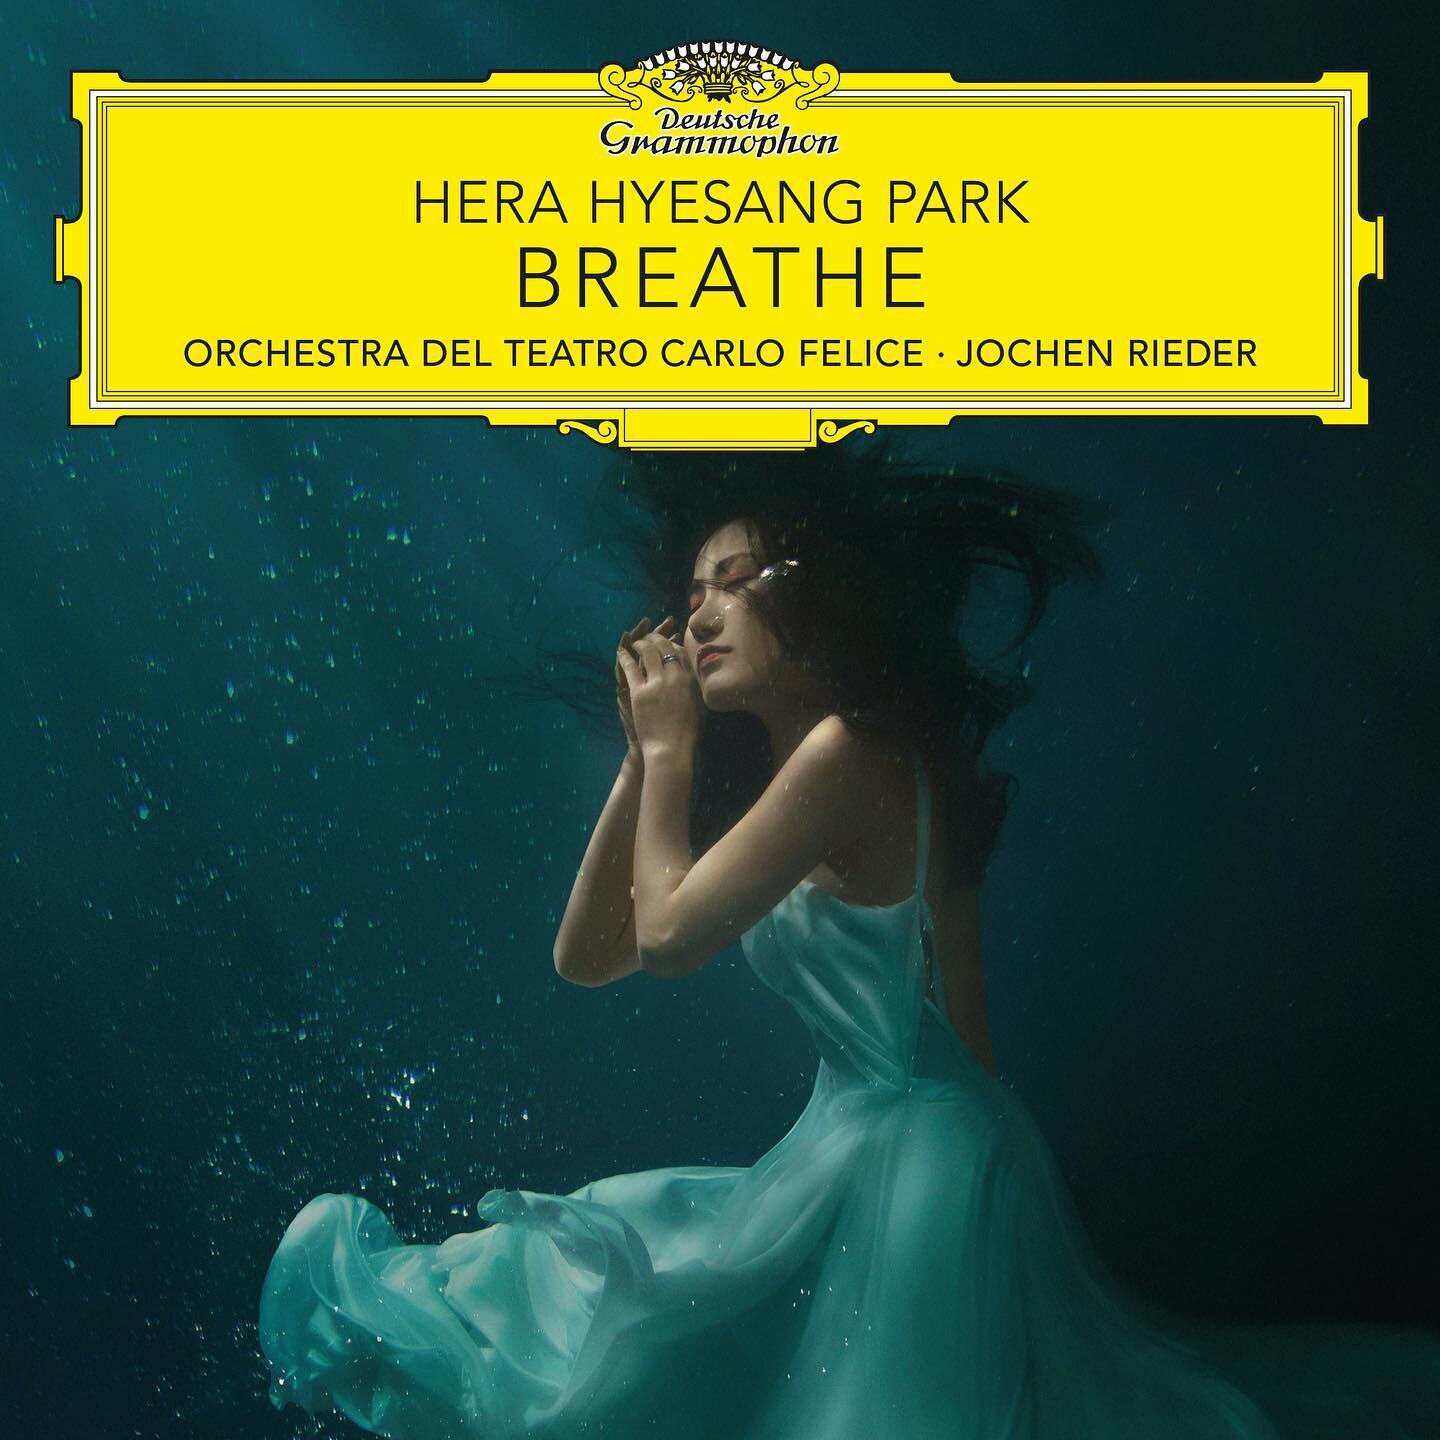 NEW MUSIC 🎶 

Today, the stunning song &lsquo;While You Live&rsquo; by @lukehowardmusic features on the brand new album &lsquo;Breathe&rsquo; by South Korean Soprano, @hera.hyesang.park.soprano for @dgclassics 

The album opens with Luke&rsquo;s cap